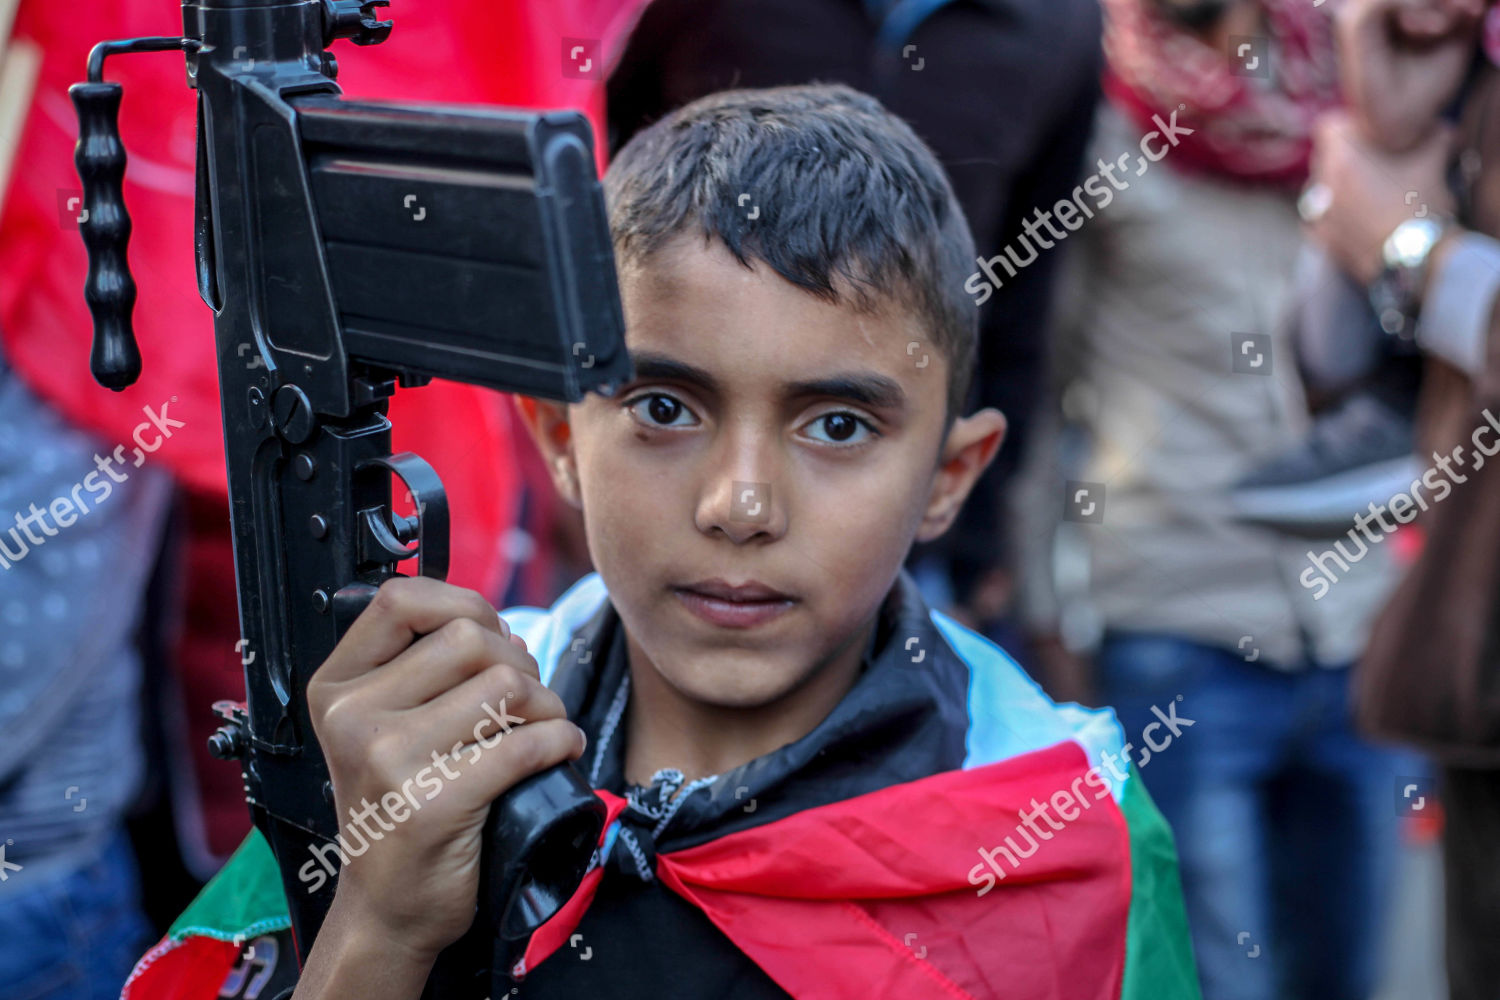 popular-front-for-the-liberation-of-palestine-rally-beit-hanoun-occupied-palestinian-territories-shutterstock-editorial-10030568a.jpg